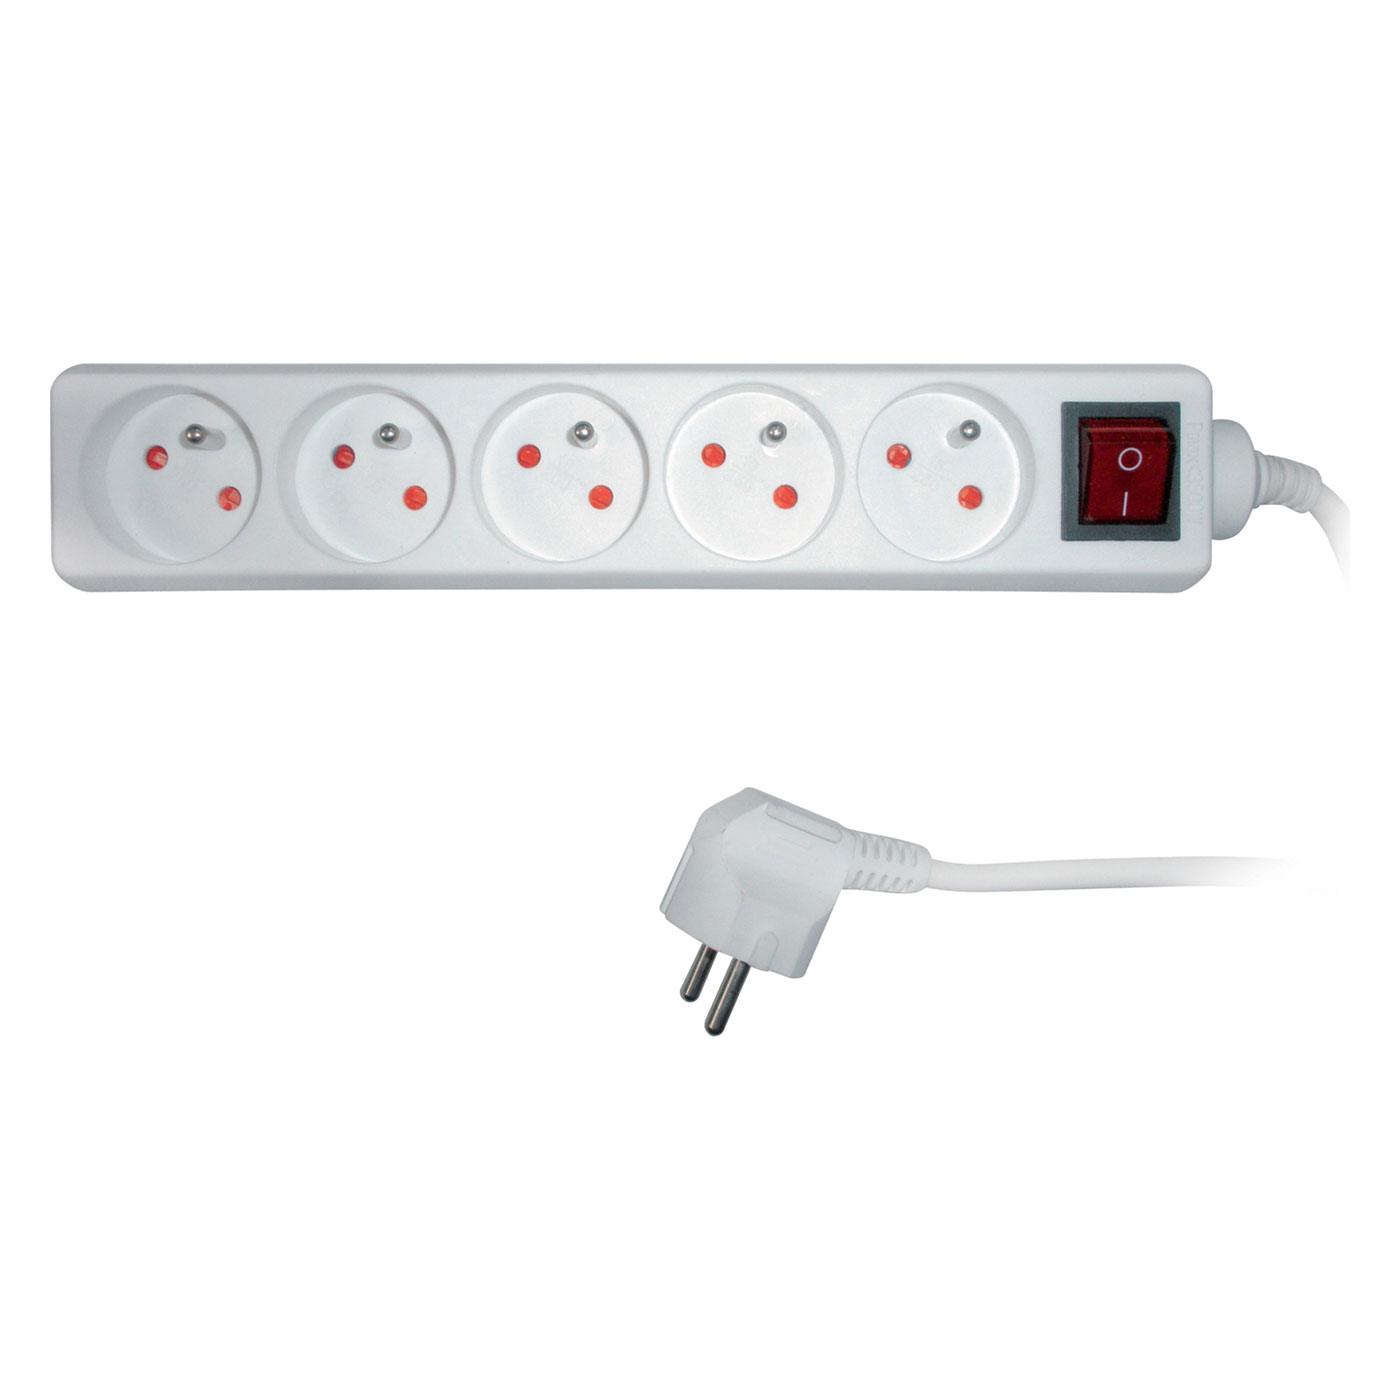 Extension Cord With Switch: Power Control Simplified